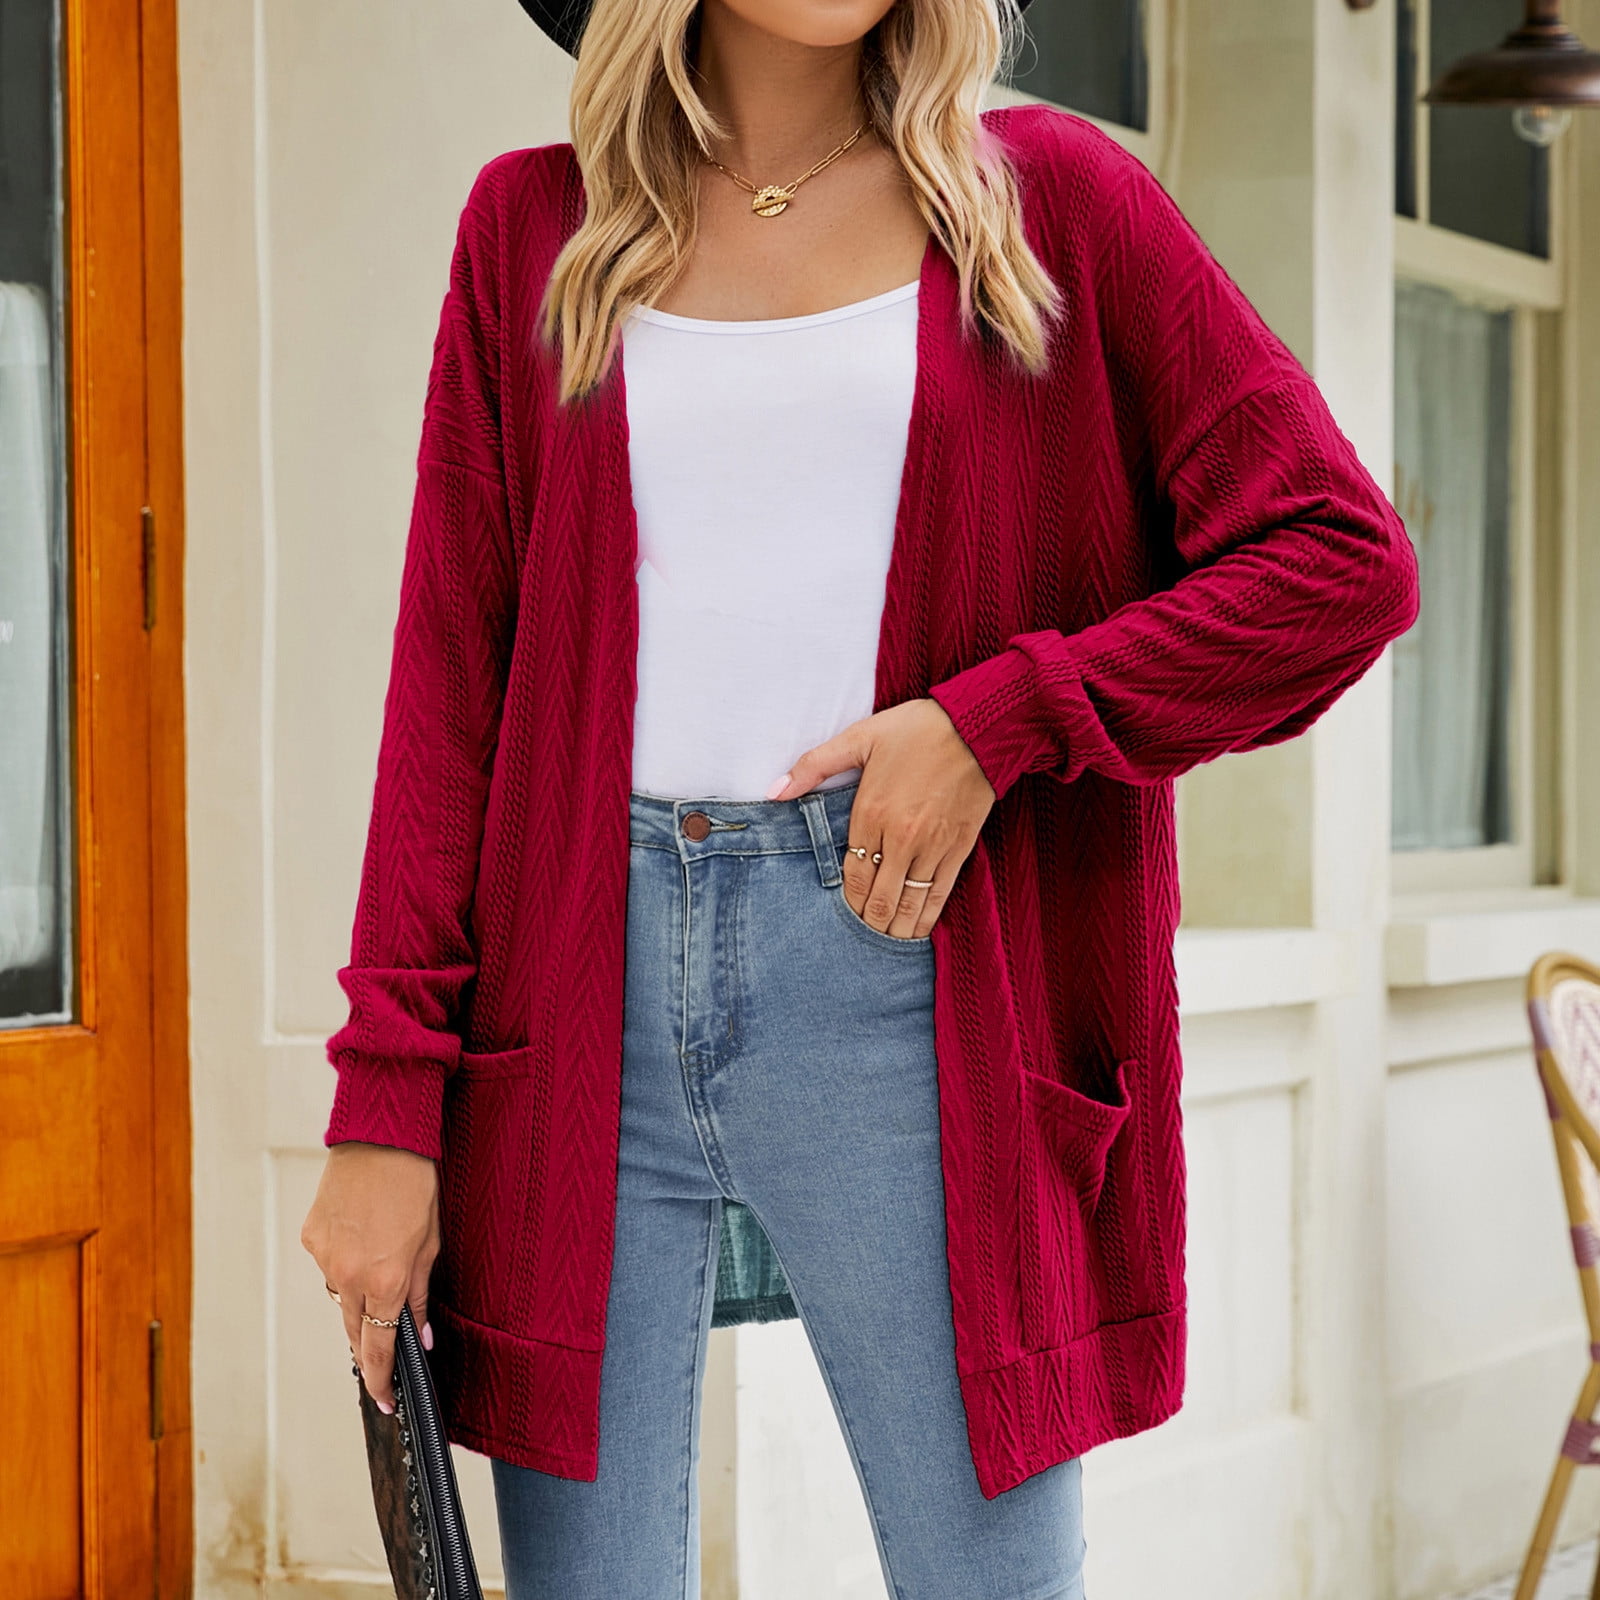 Plus Size Cardigan Clearance under $20 Woman Fashion Pocket Color Long Sleeves Knit Cardigan Tops Blouse M - Walmart.com